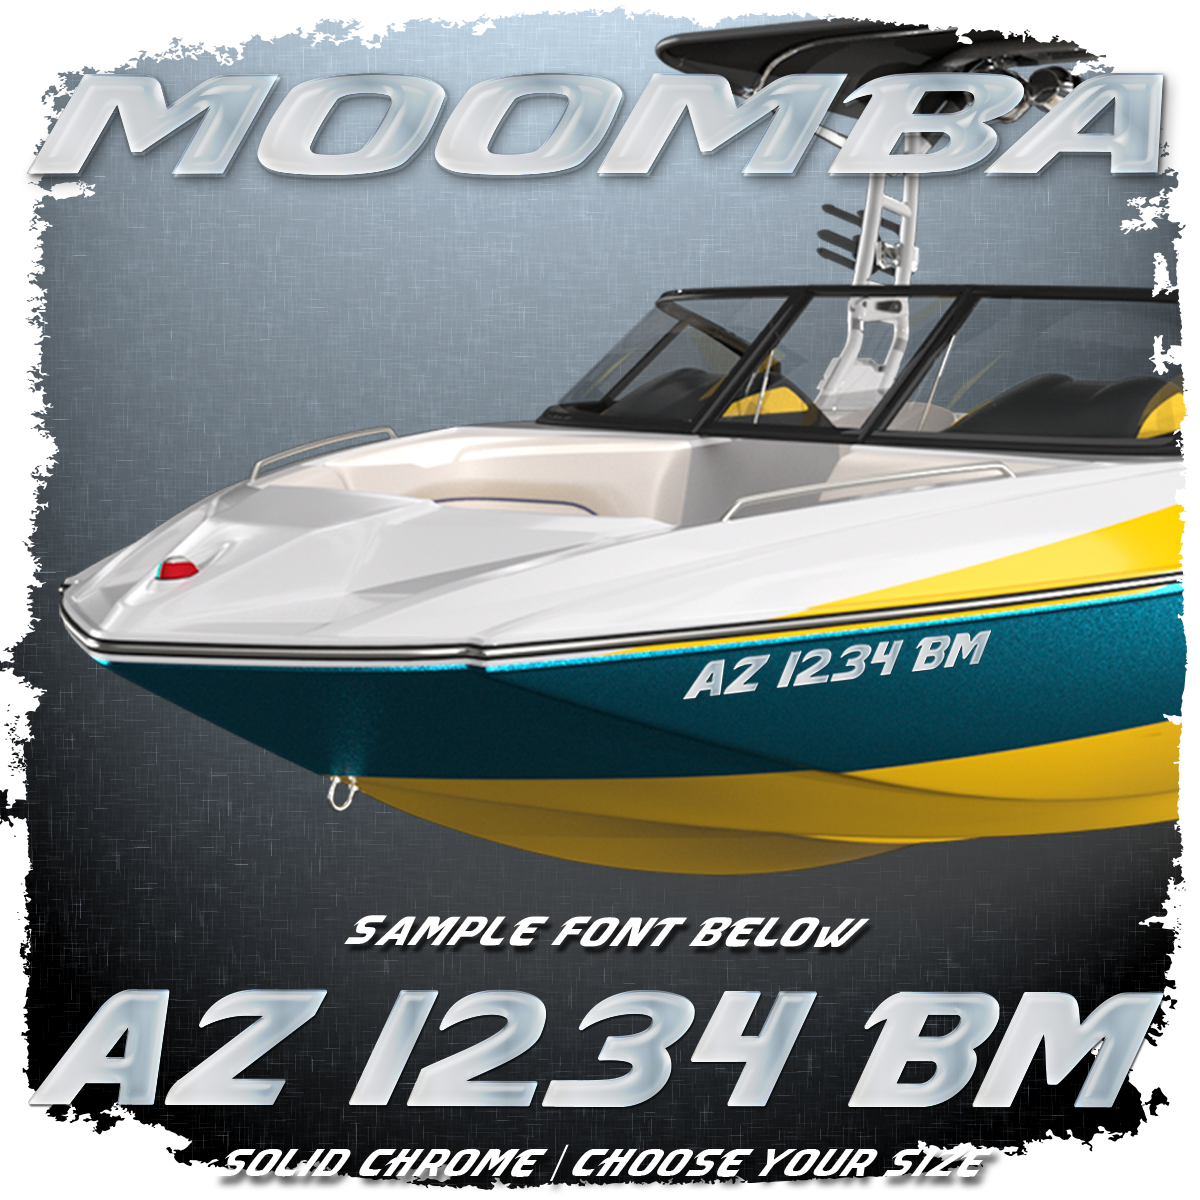 Moomba Registration (2 included), Factory Matched Chrome